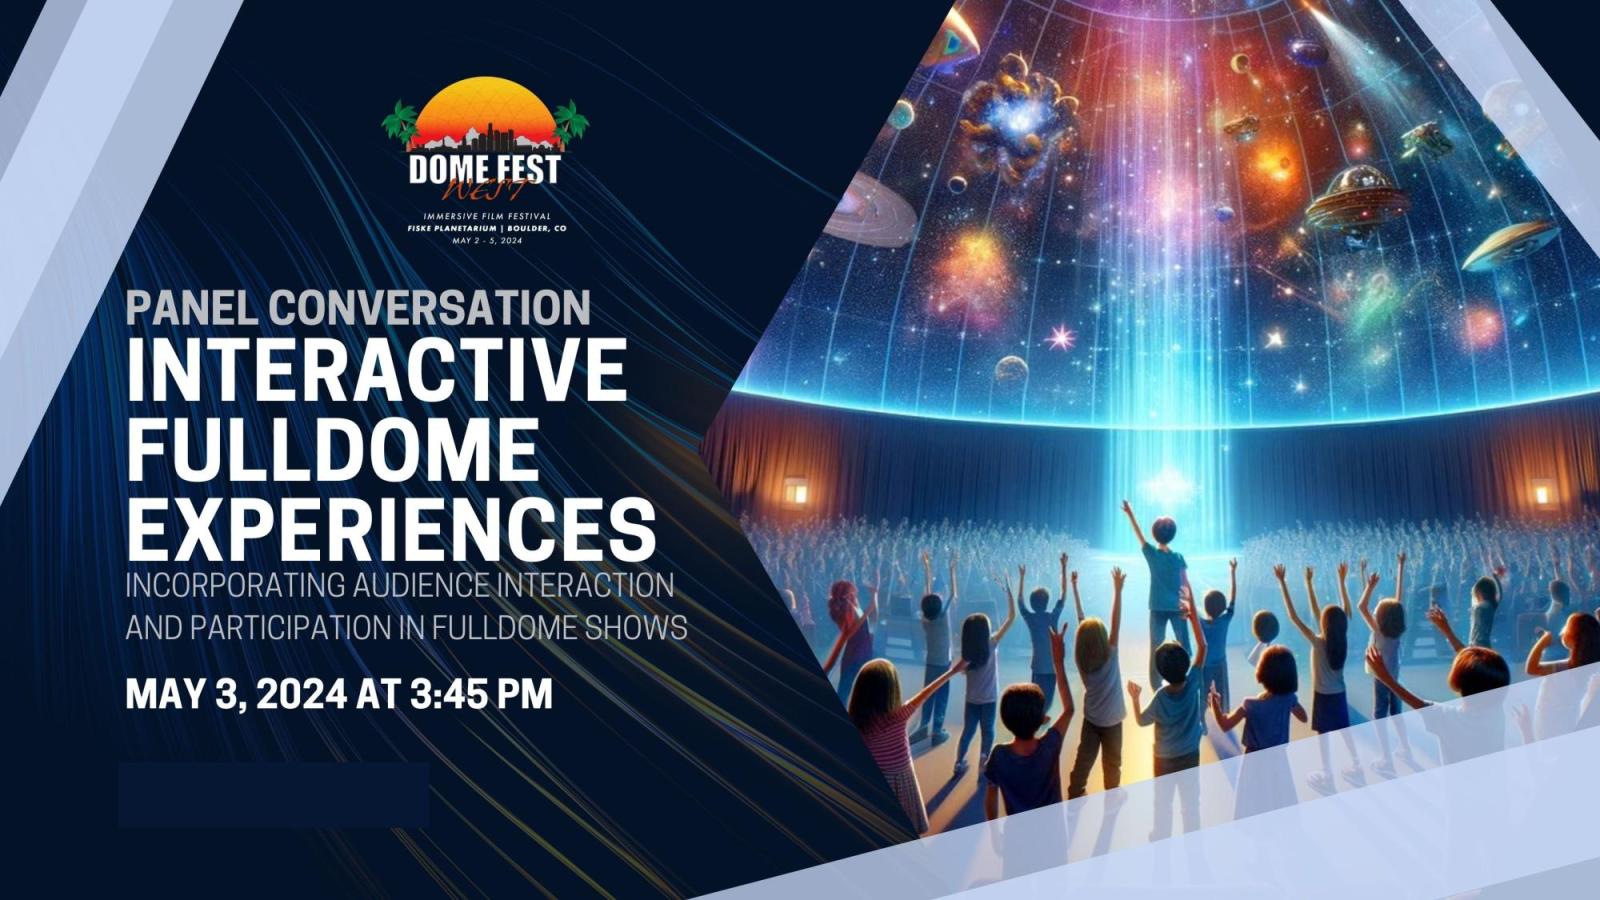 May 3 Panel conversation interactive fulldome experiences text with Dome Fest West logo and a still images from film